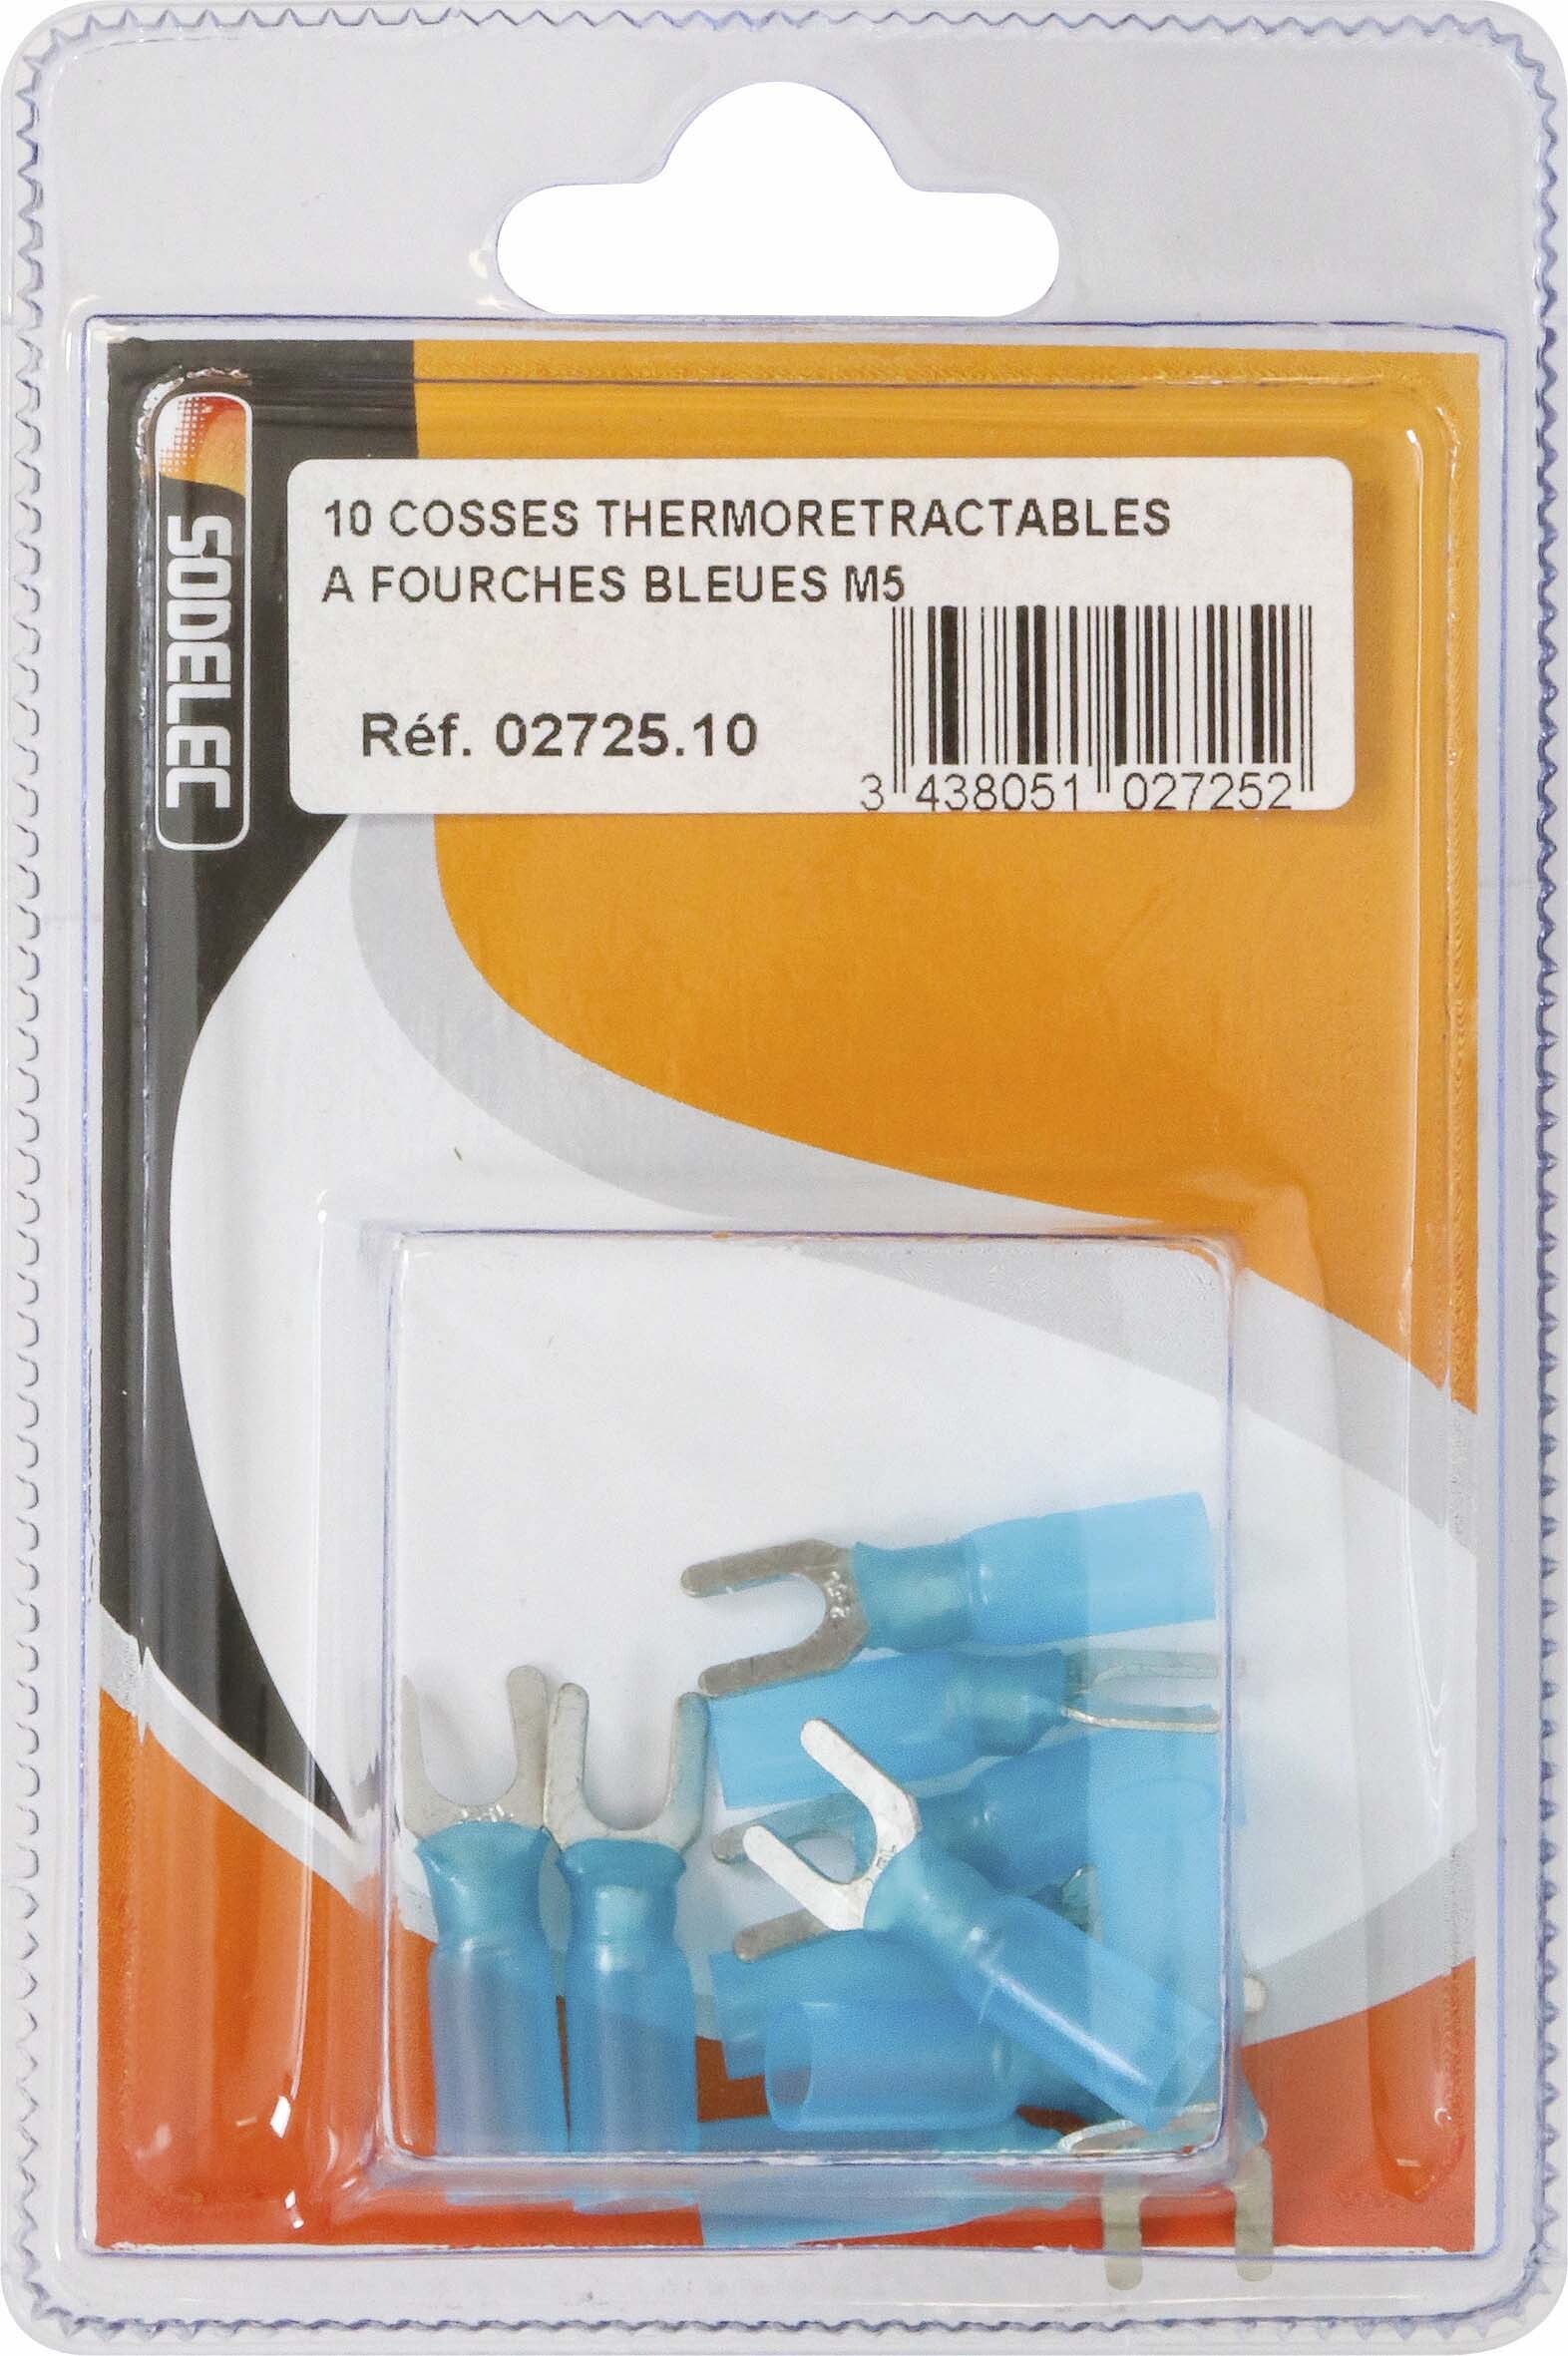 Sachet 10 cosses thermoretractables a fourches bleues m5 - 272510